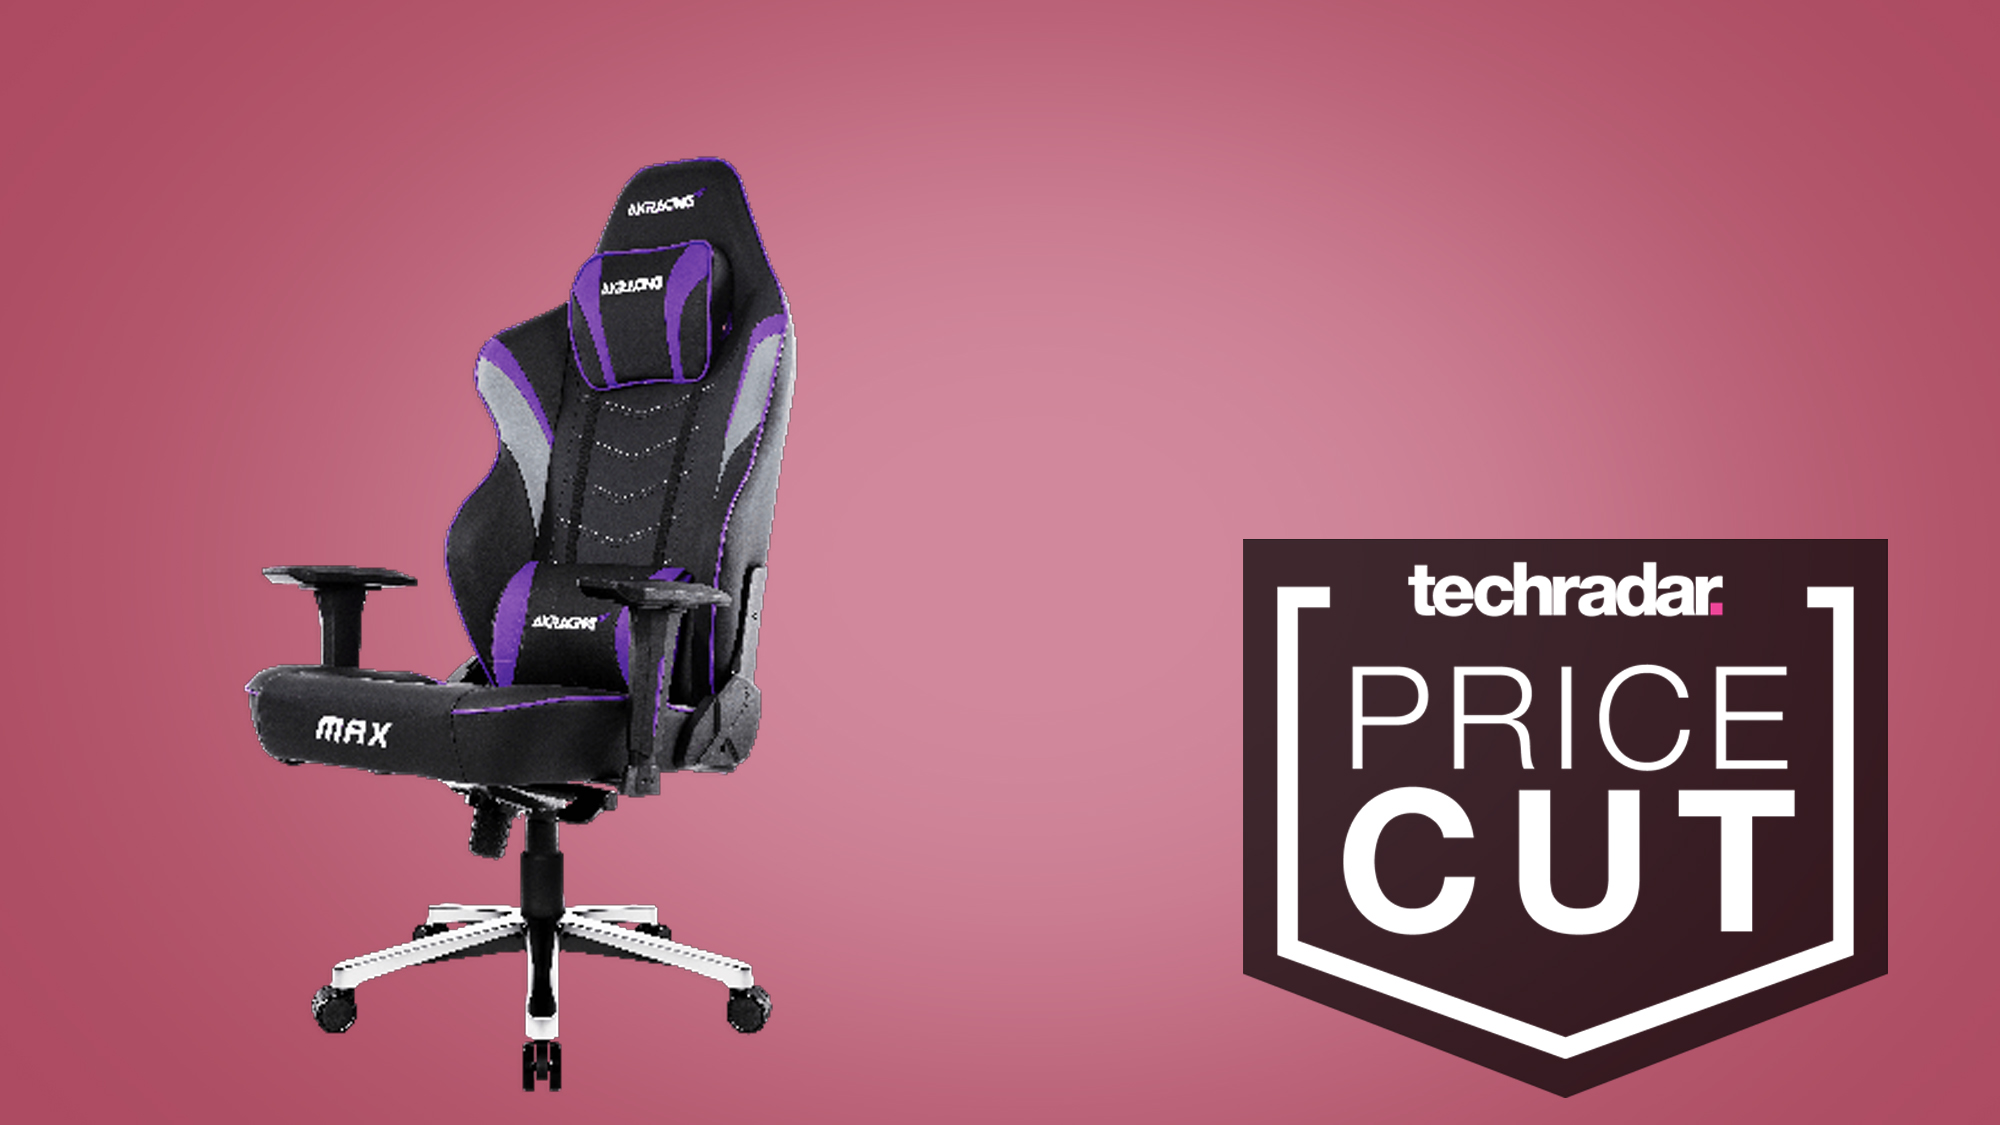 Cyber Monday gaming chair deals 2021